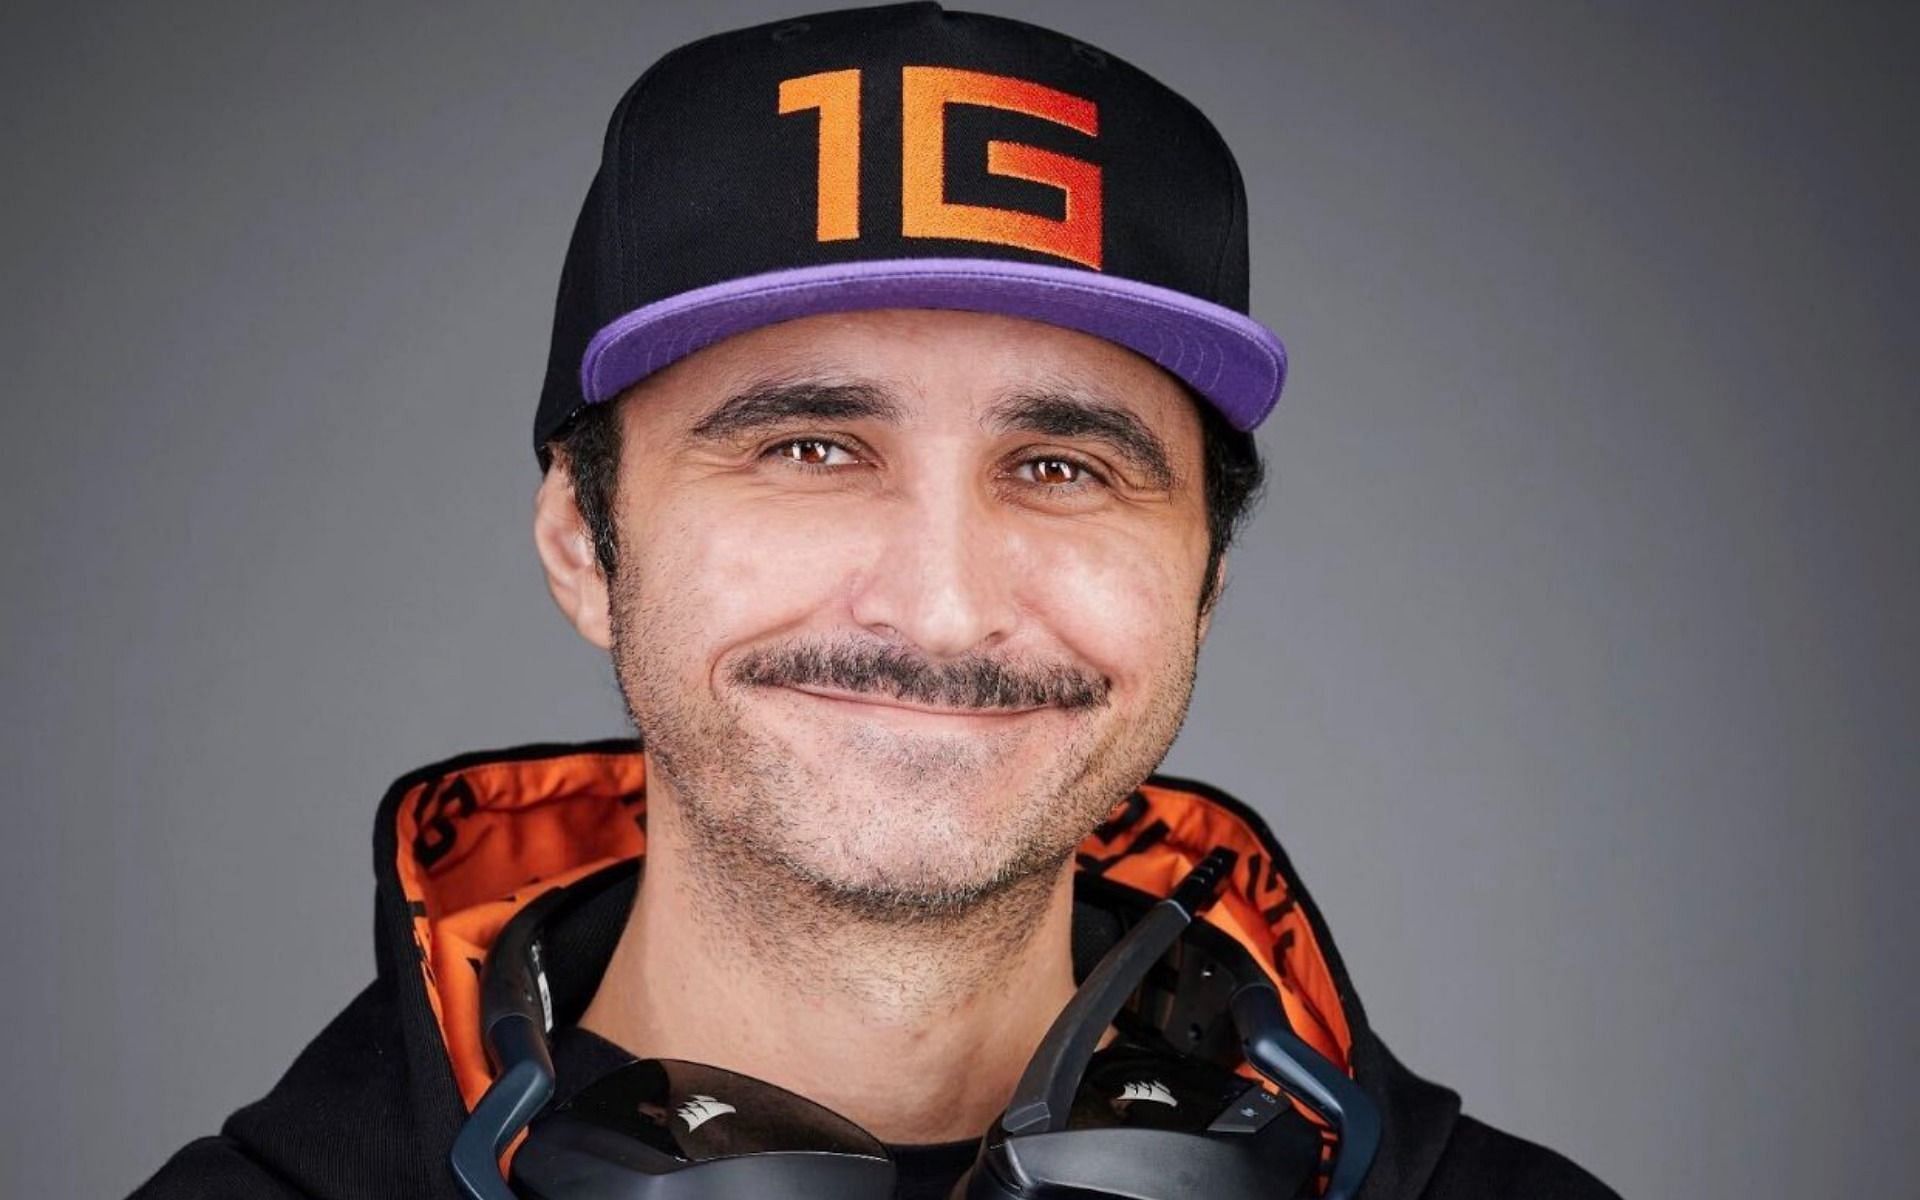 summit1g encounters a &quot;Toxic Philosopher&quot; in Apex Legends (Image via Twitter/summit1g)